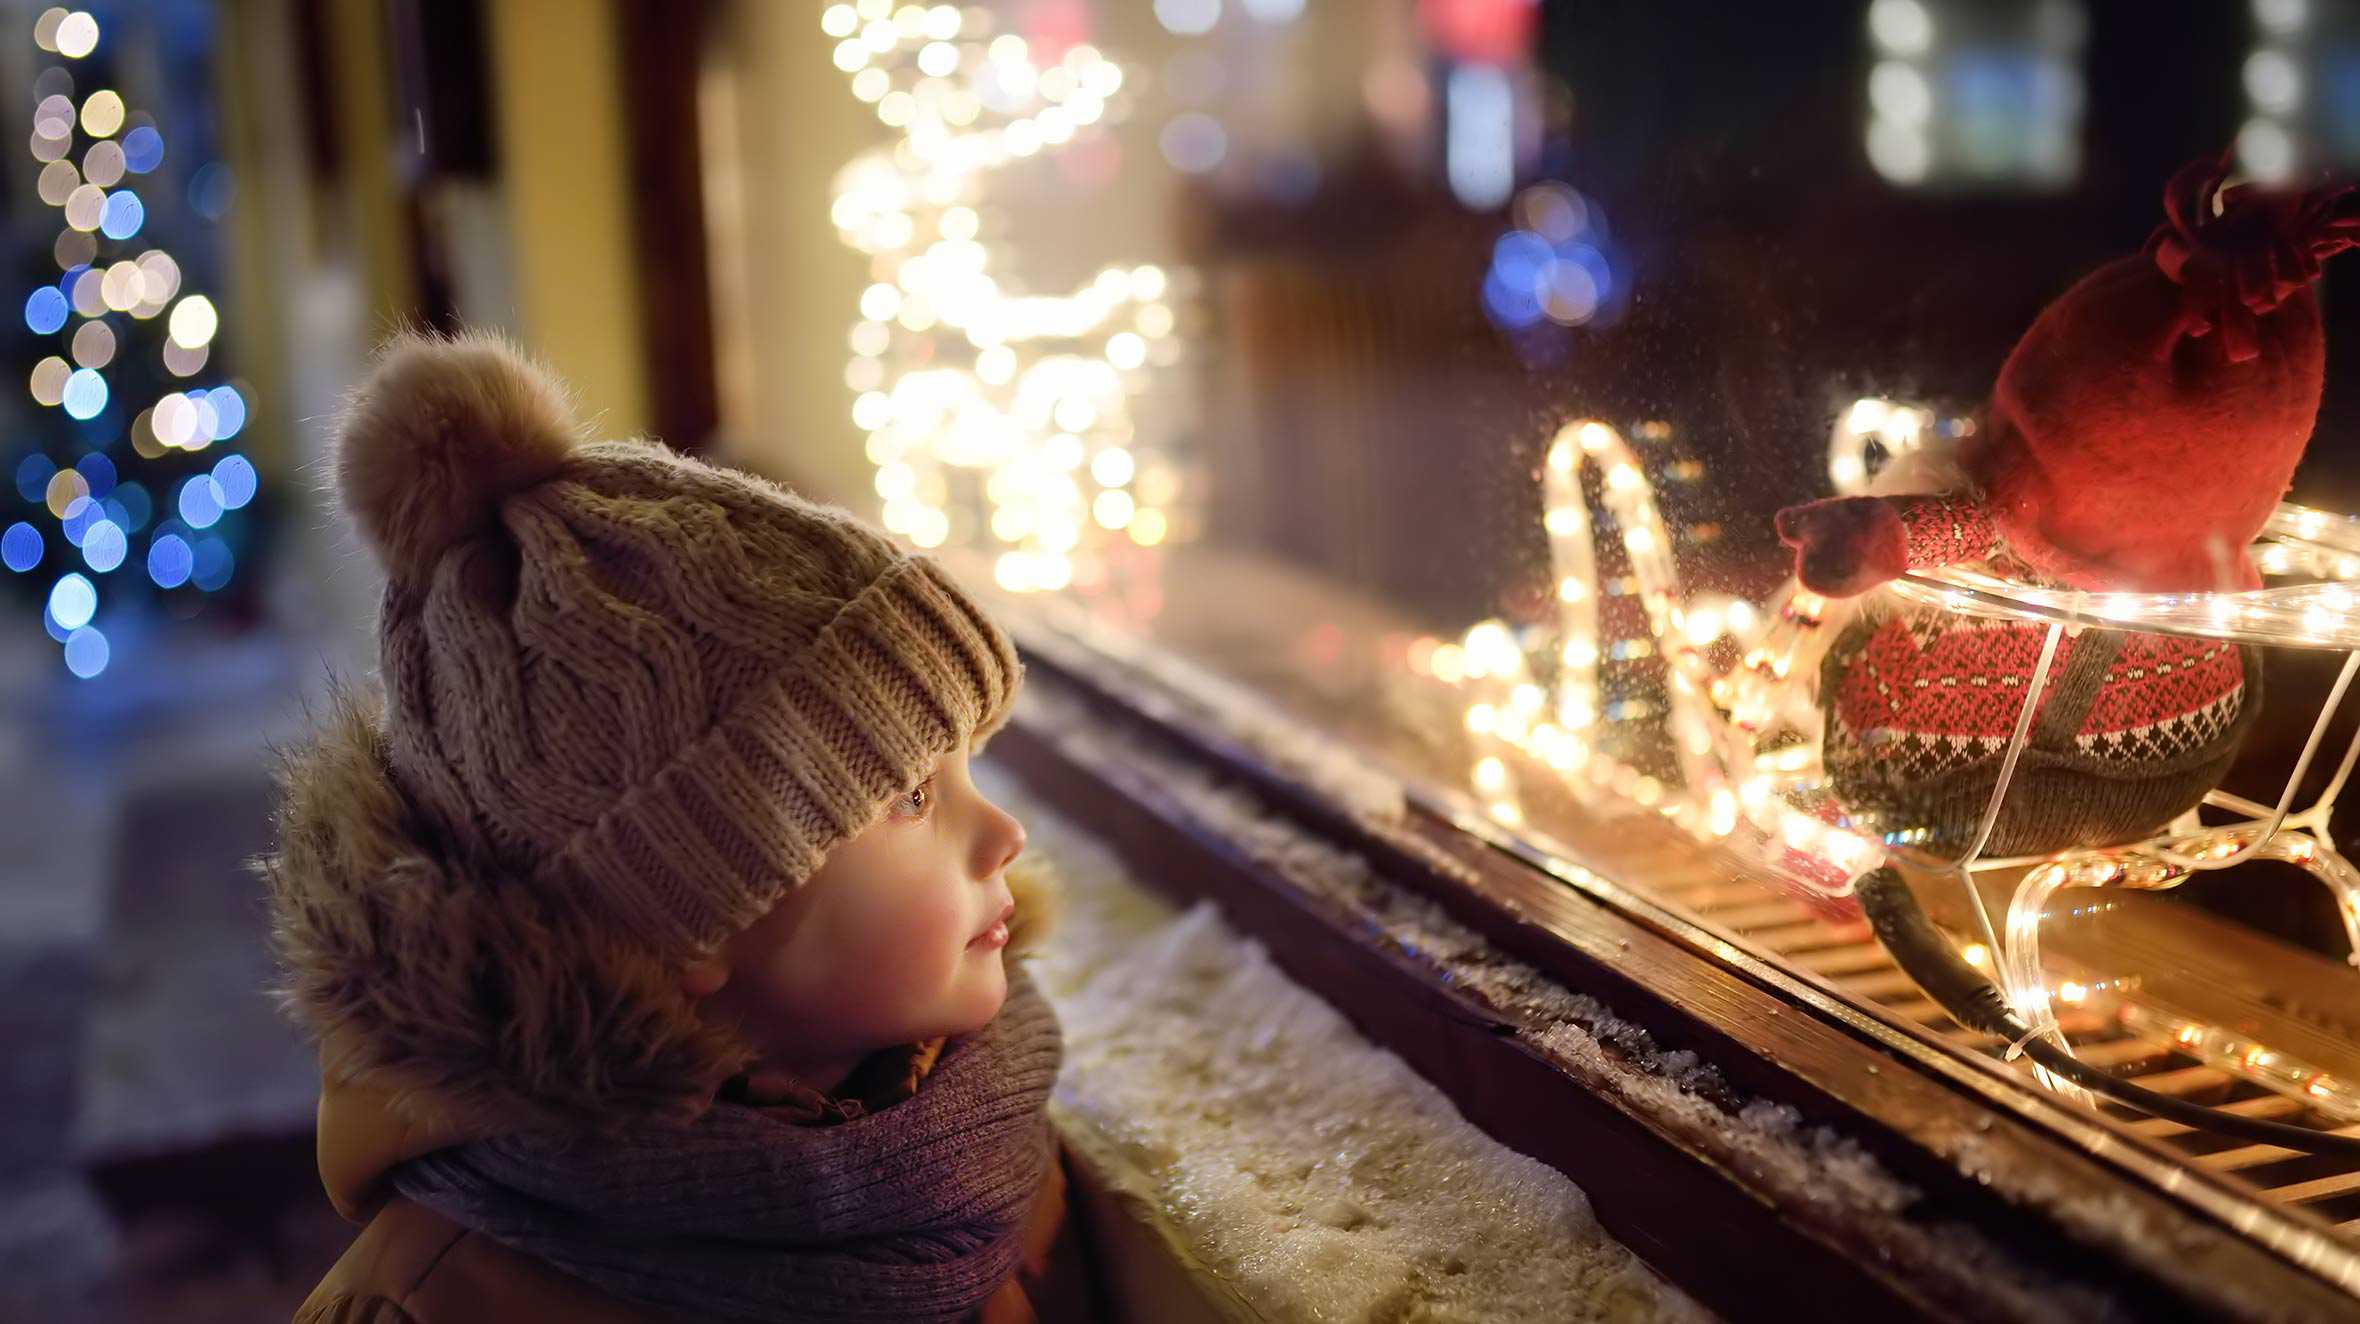 A child in a woolly hat and scarf, looking through a window at some Christmas lights.